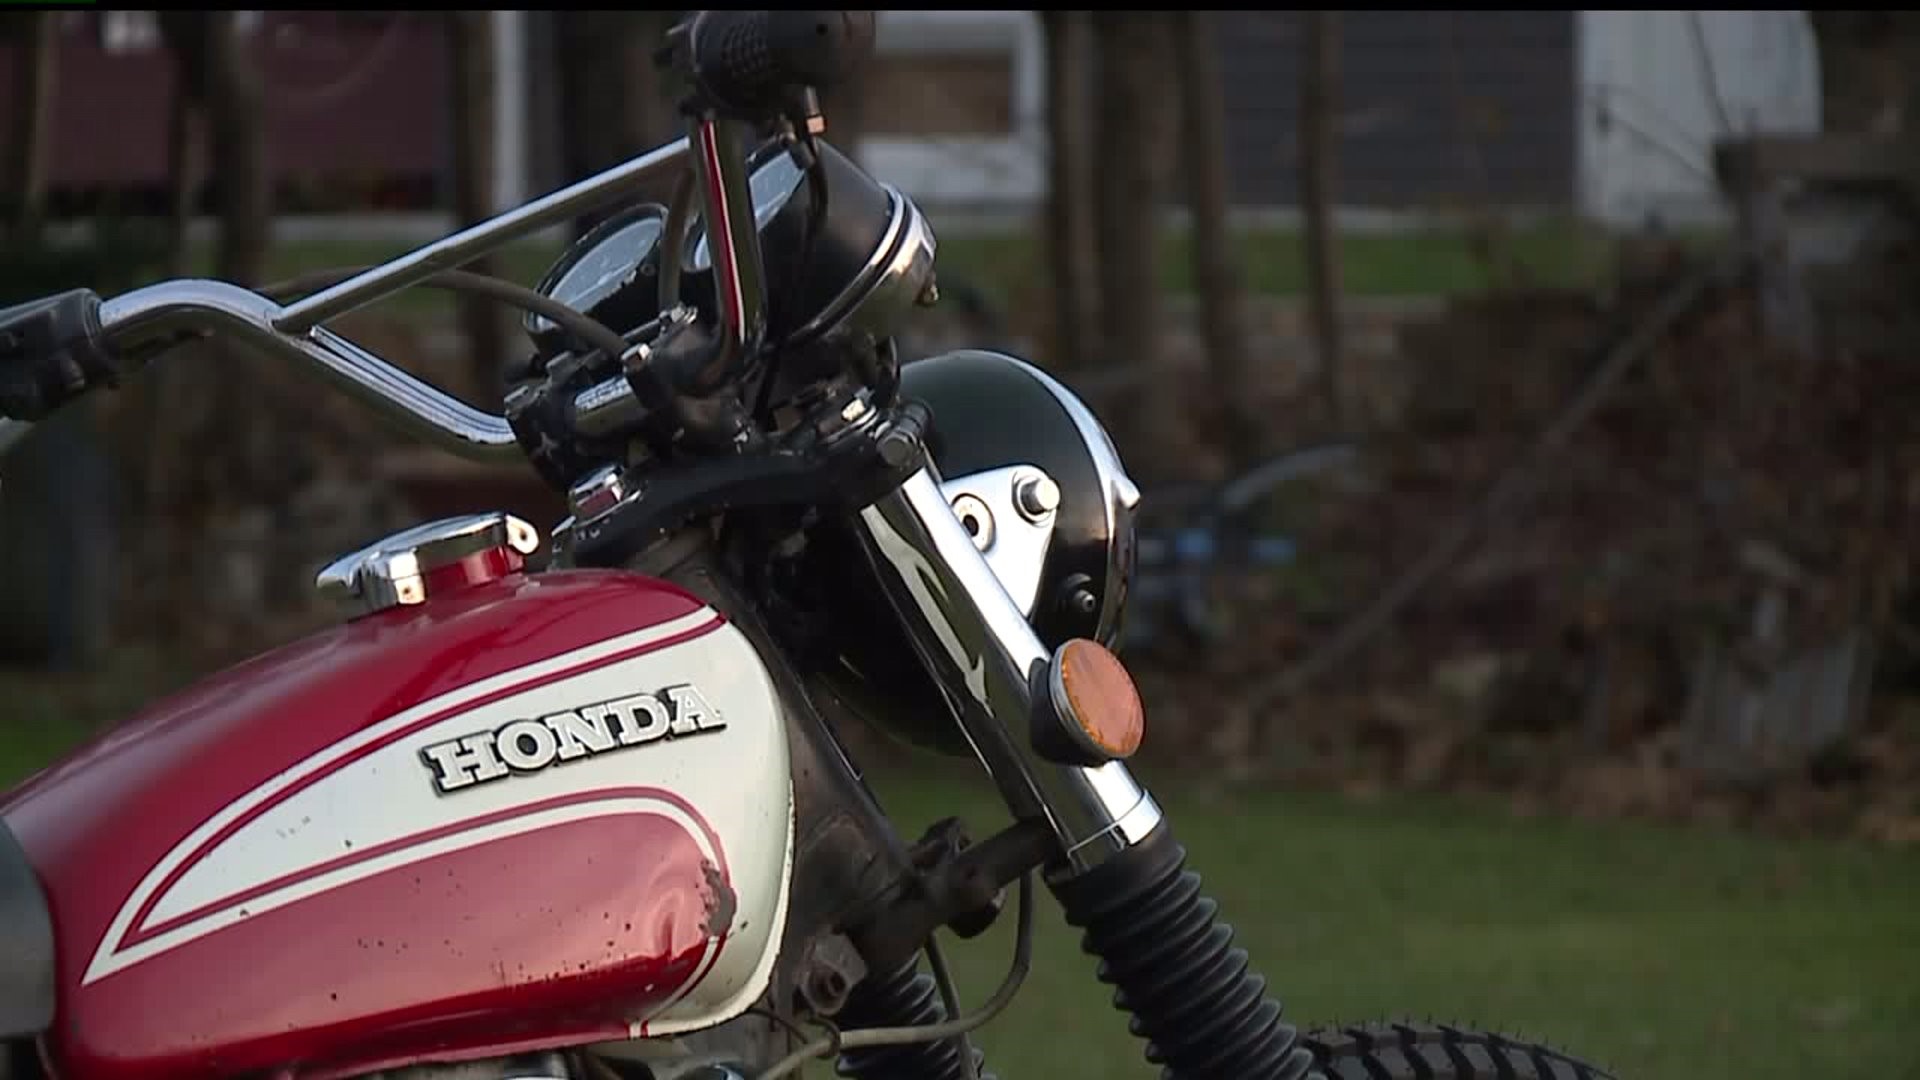 Adams County biker building a motorcycle to donate and raise money for troops overseas